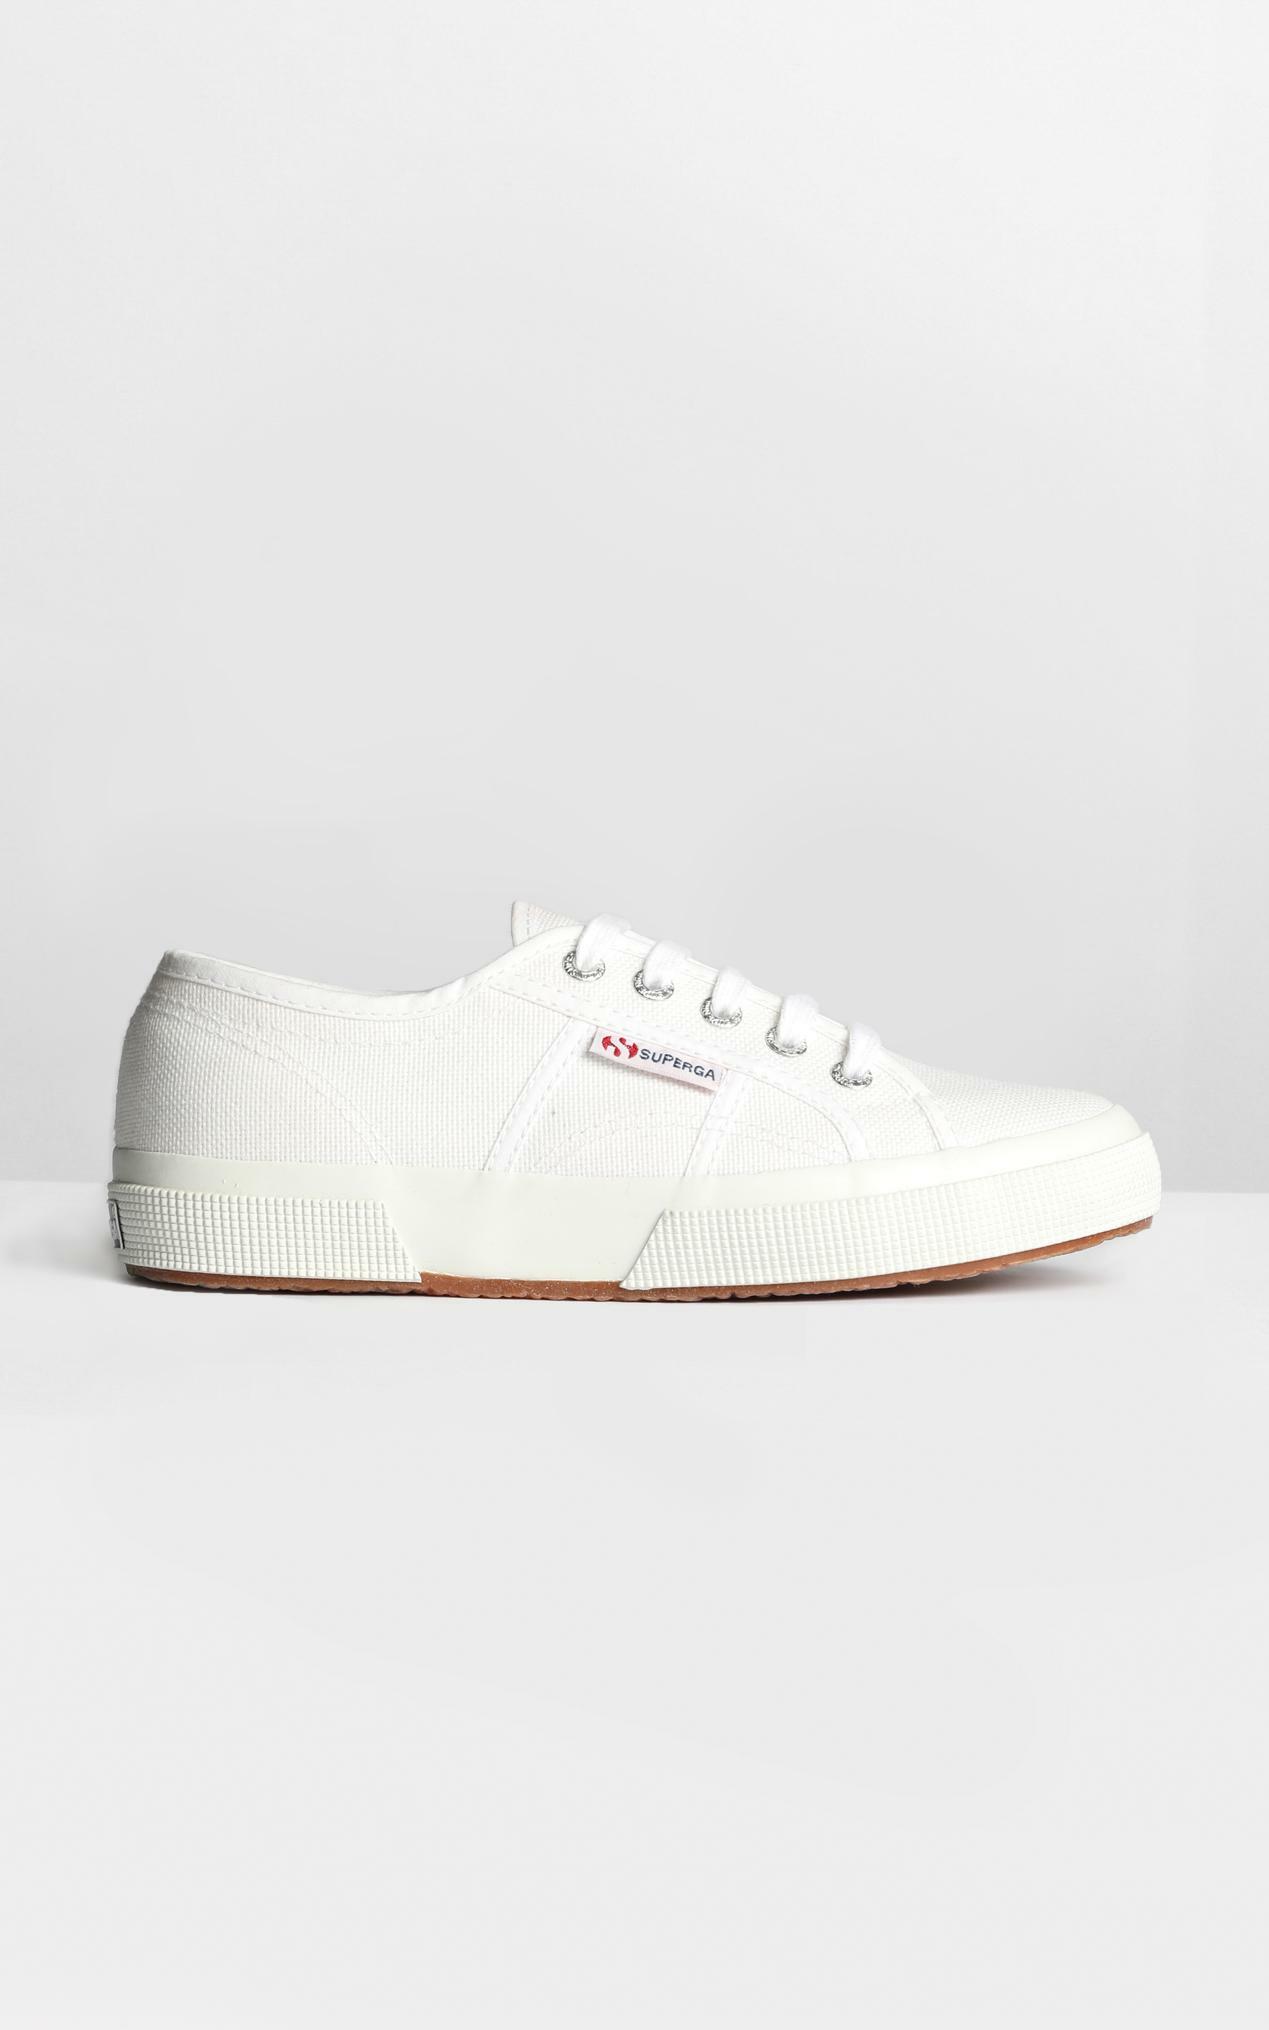 Superga - 2750 Cotu Classic Sneakers in White Canvas - 05, WHT2, hi-res image number null